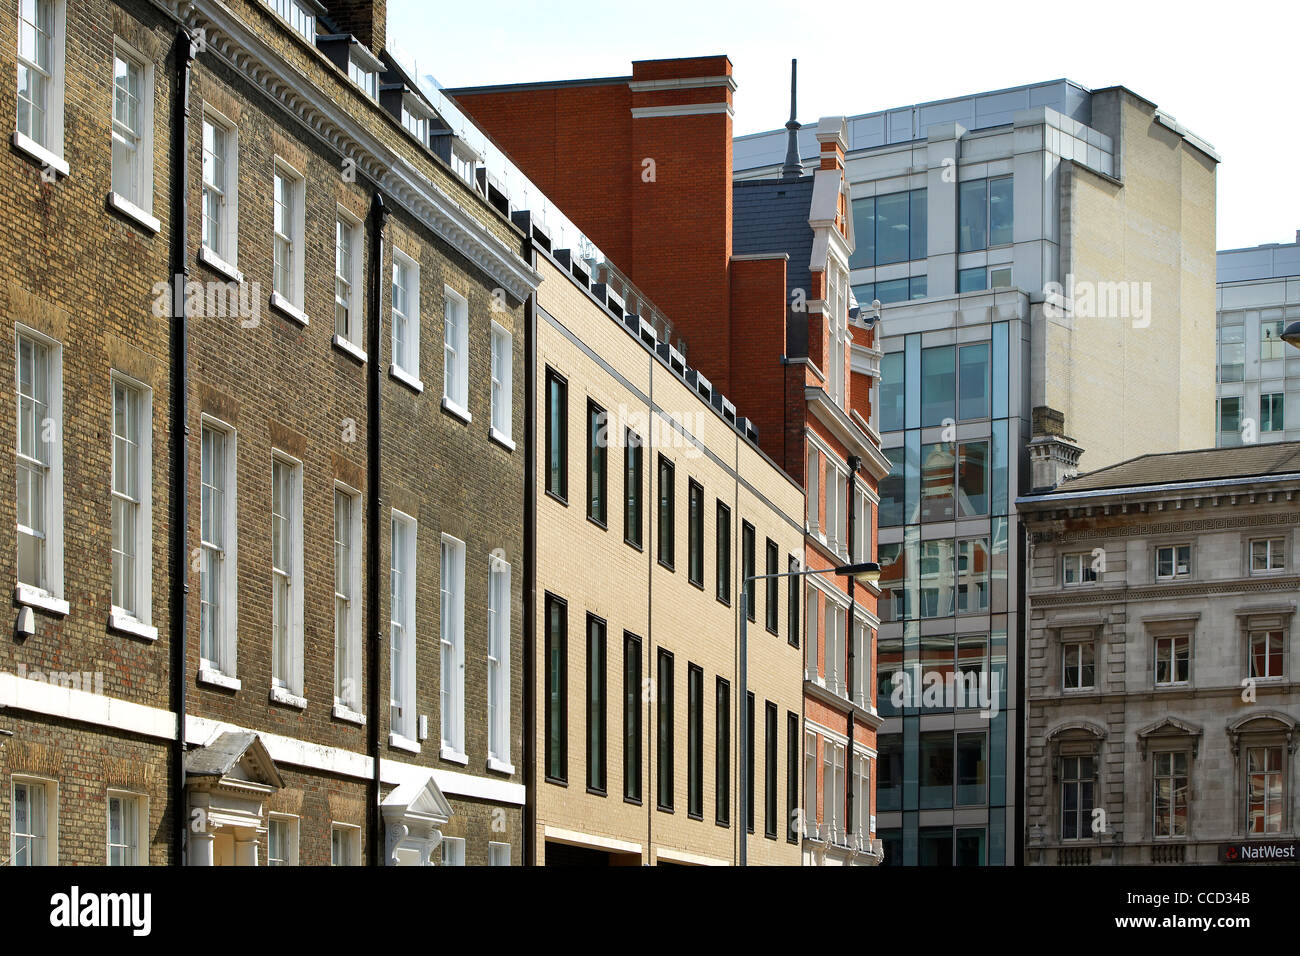 ONE SOUTHAMPTON ROW, SHEPPARD ROBSON, LONDON, 2010, EXTERIOR VIEW ALONG TERRACE SHOWING DIFFERENT FACADES Stock Photo